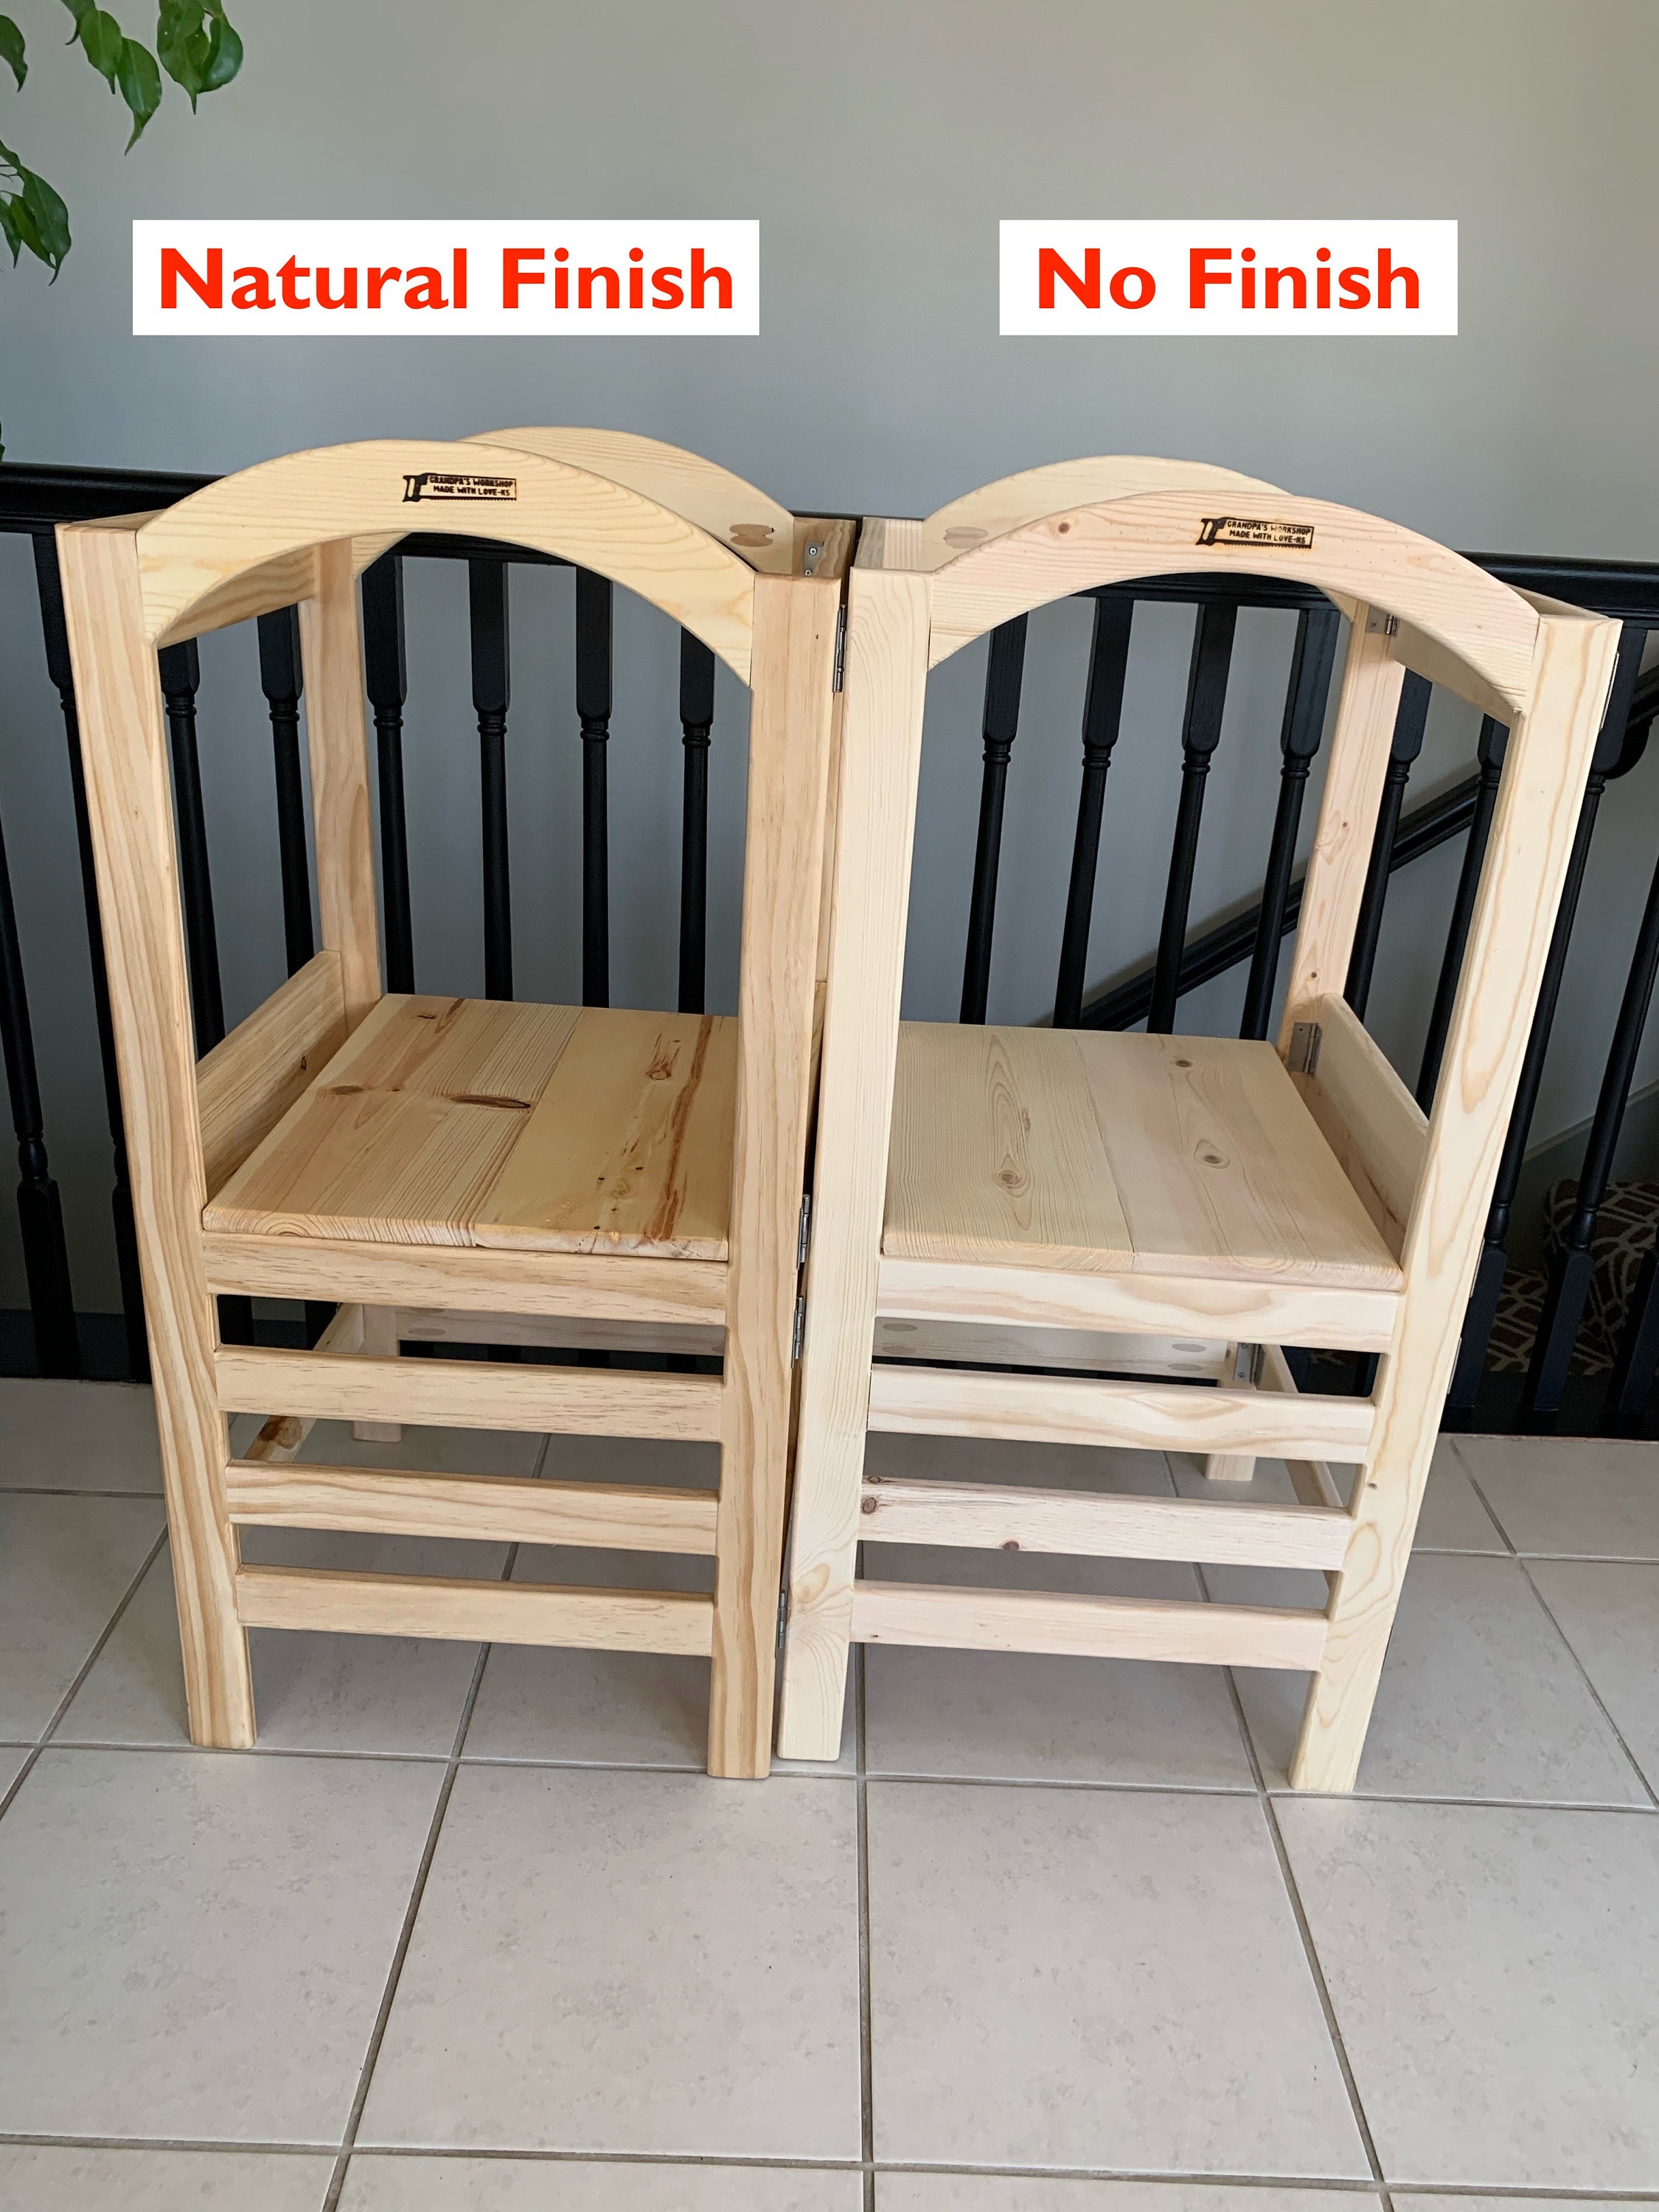 Two-Step Stool - AFK Furniture